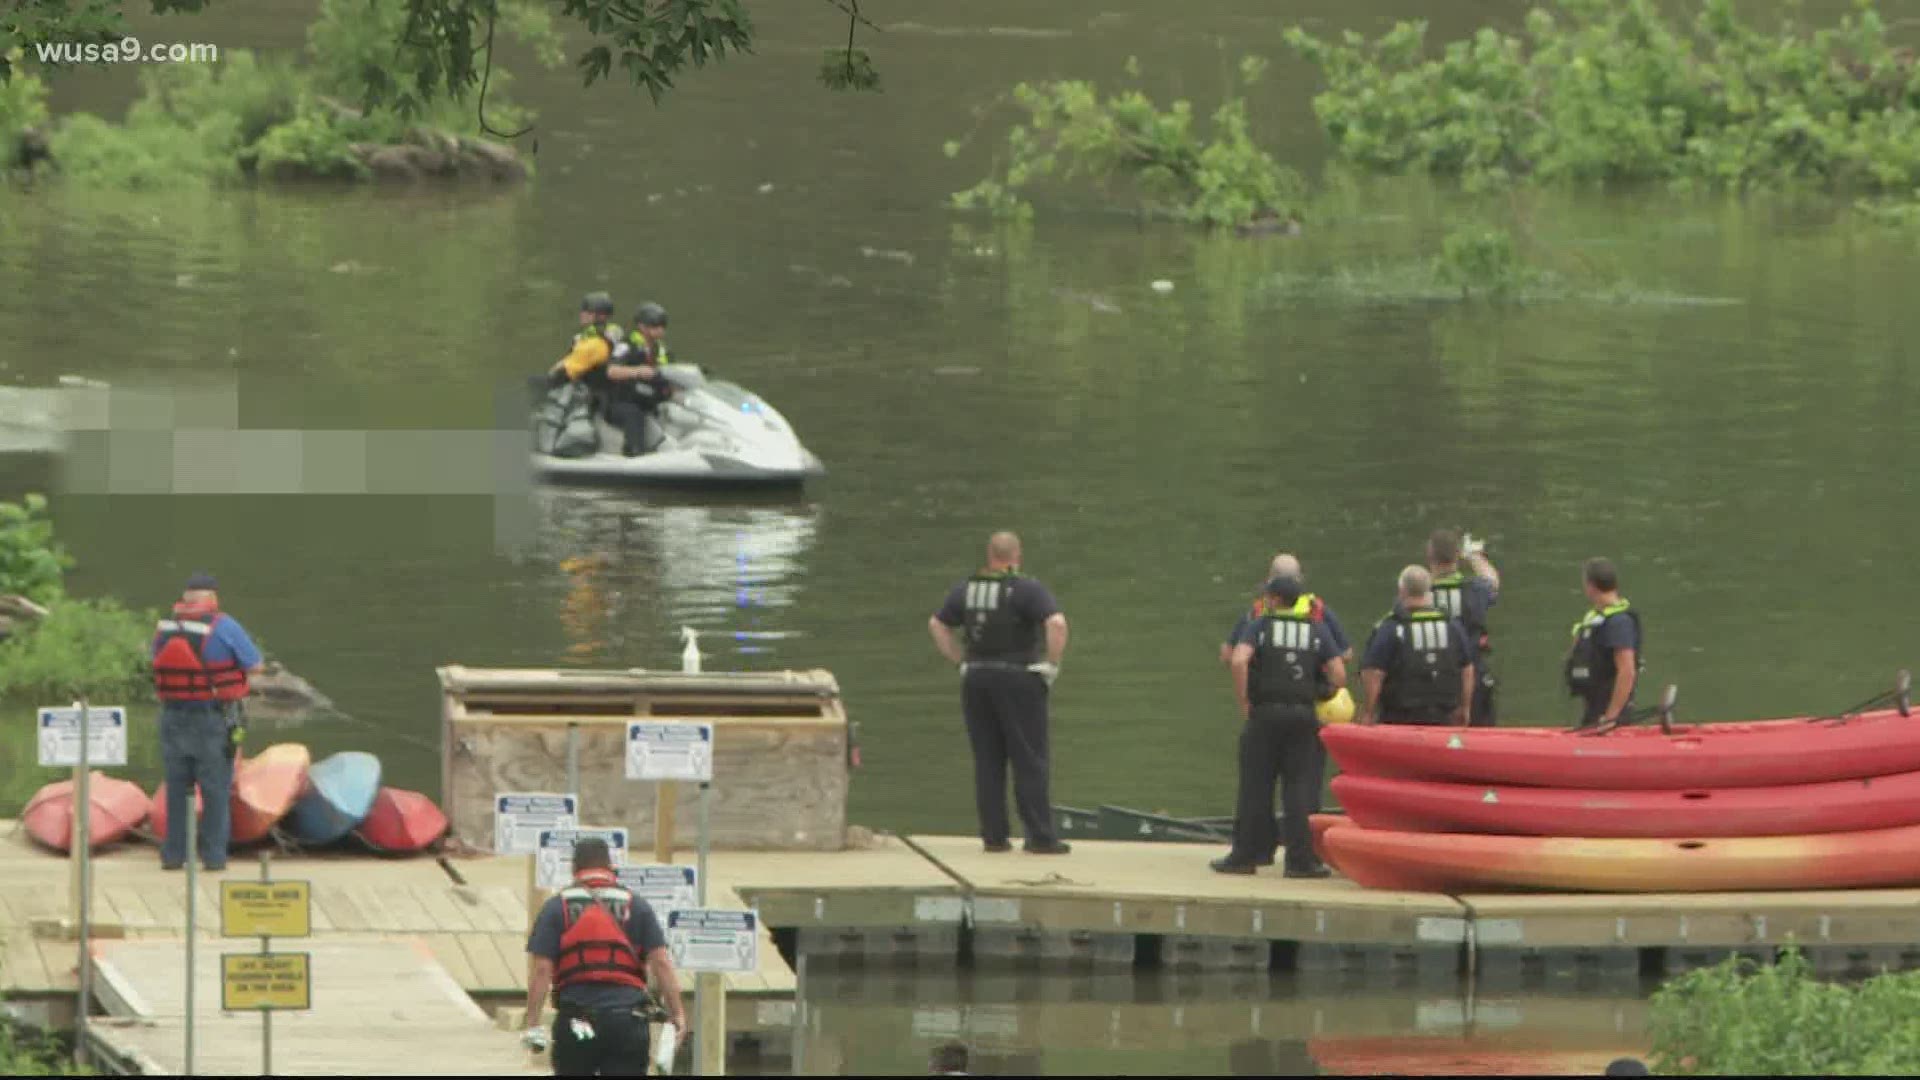 Two reported drownings have occurred in this region in the last week, and police are investigating whether the body found is either of those drowning victims.